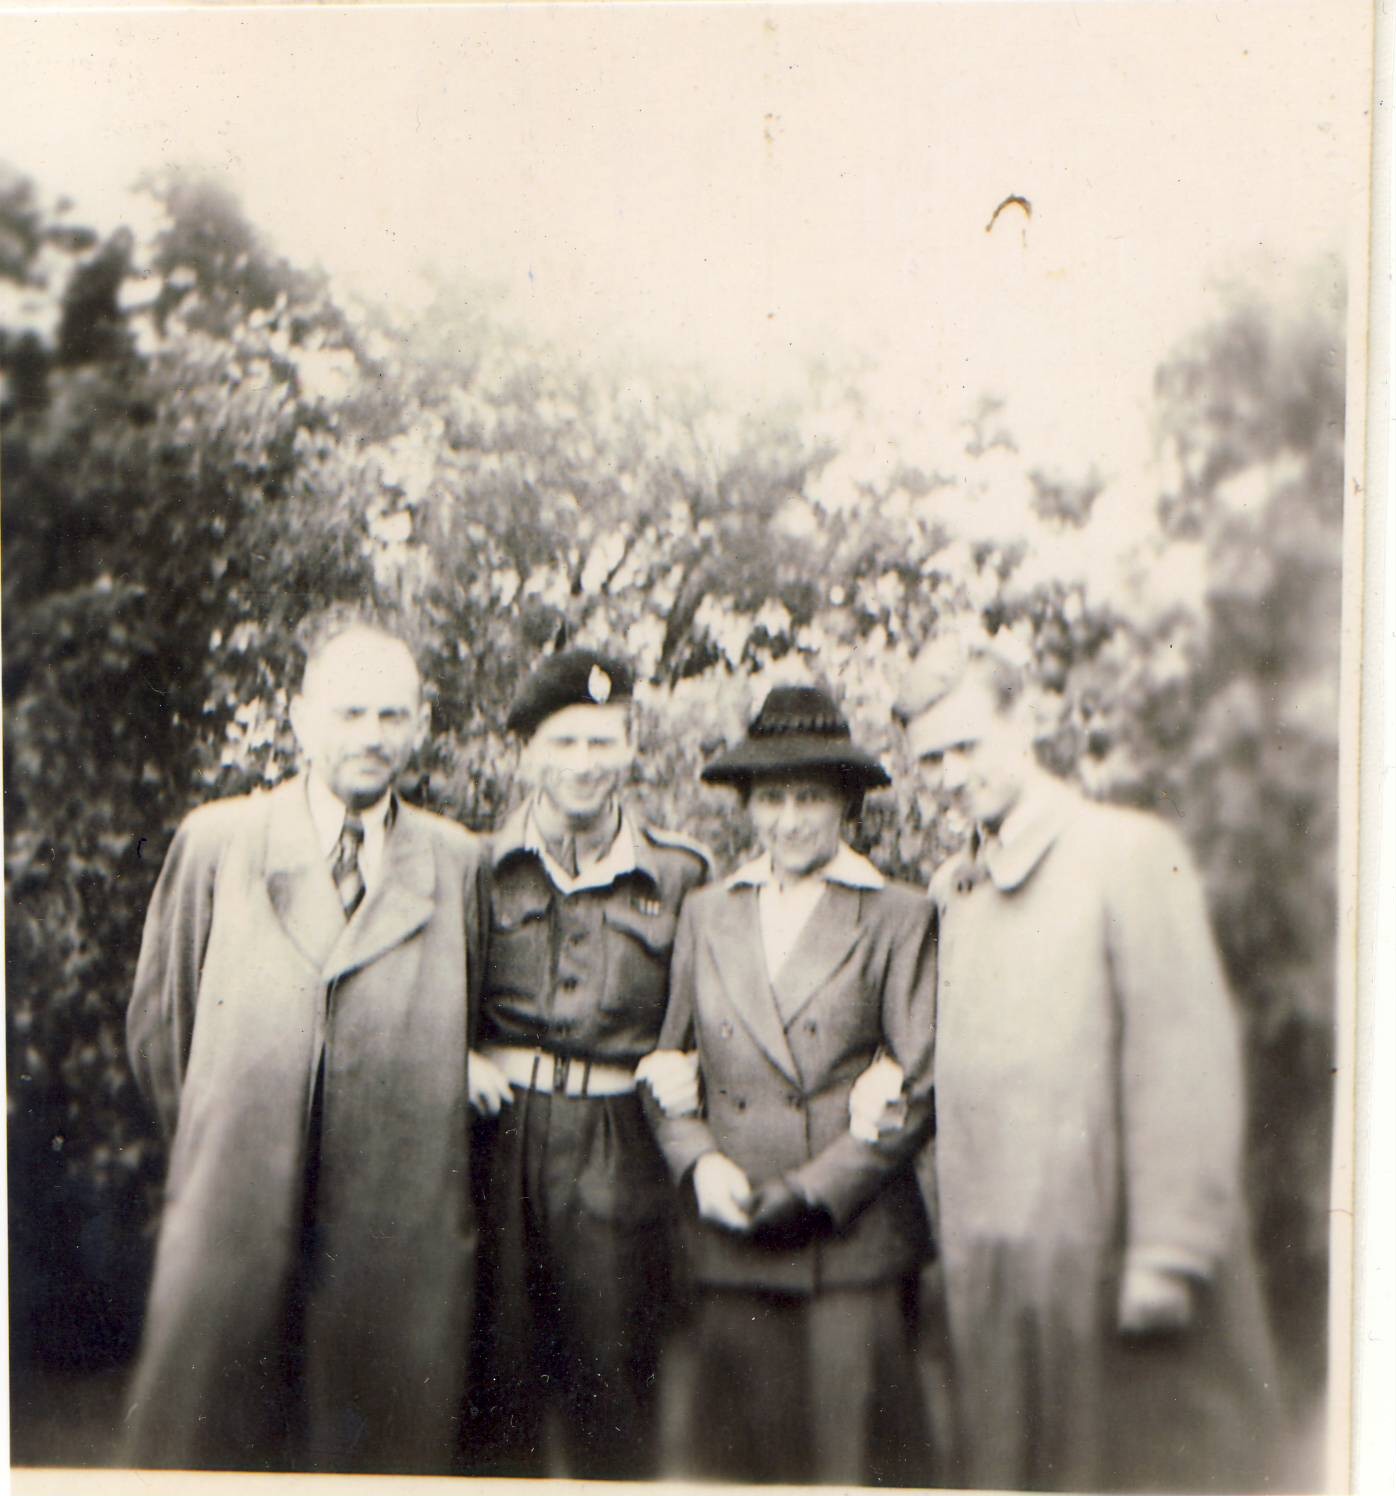 Curt and Gertrude Weiss, Kenneth and Gerhardt in 1946